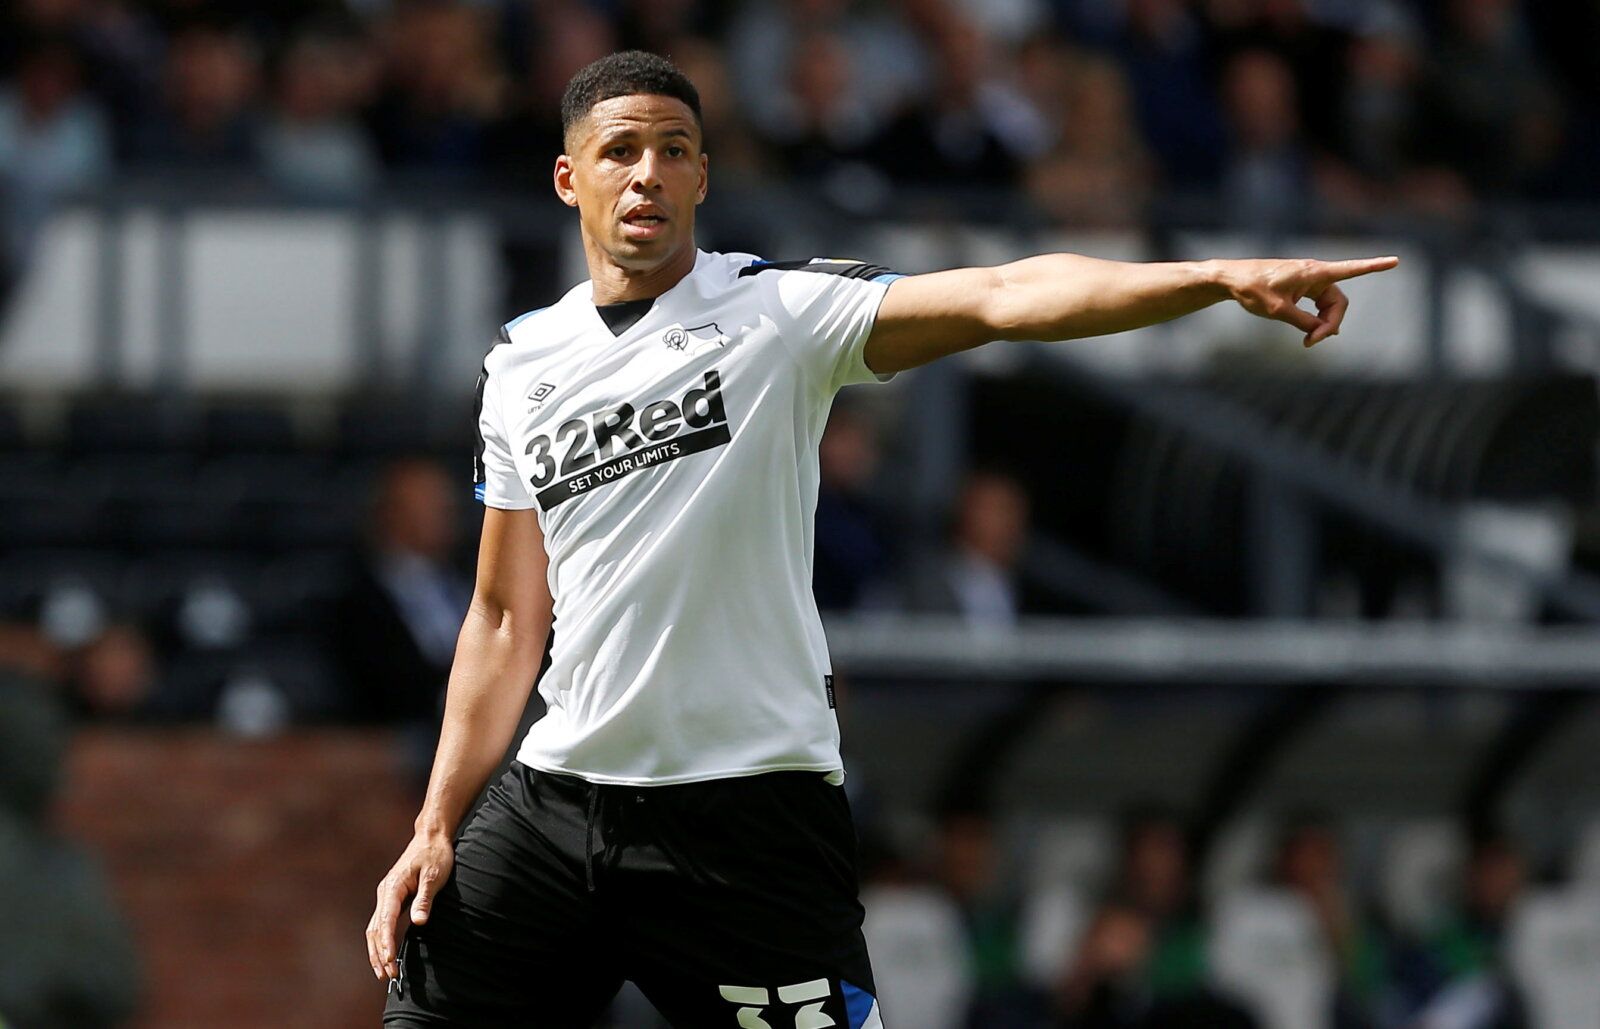 Soccer Football - Championship - Derby County v Nottingham Forest - Pride Park, Derby, Britain - August 28, 2021   Derby County's Curtis Davies    Action Images/Craig Brough    EDITORIAL USE ONLY. No use with unauthorized audio, video, data, fixture lists, club/league logos or 